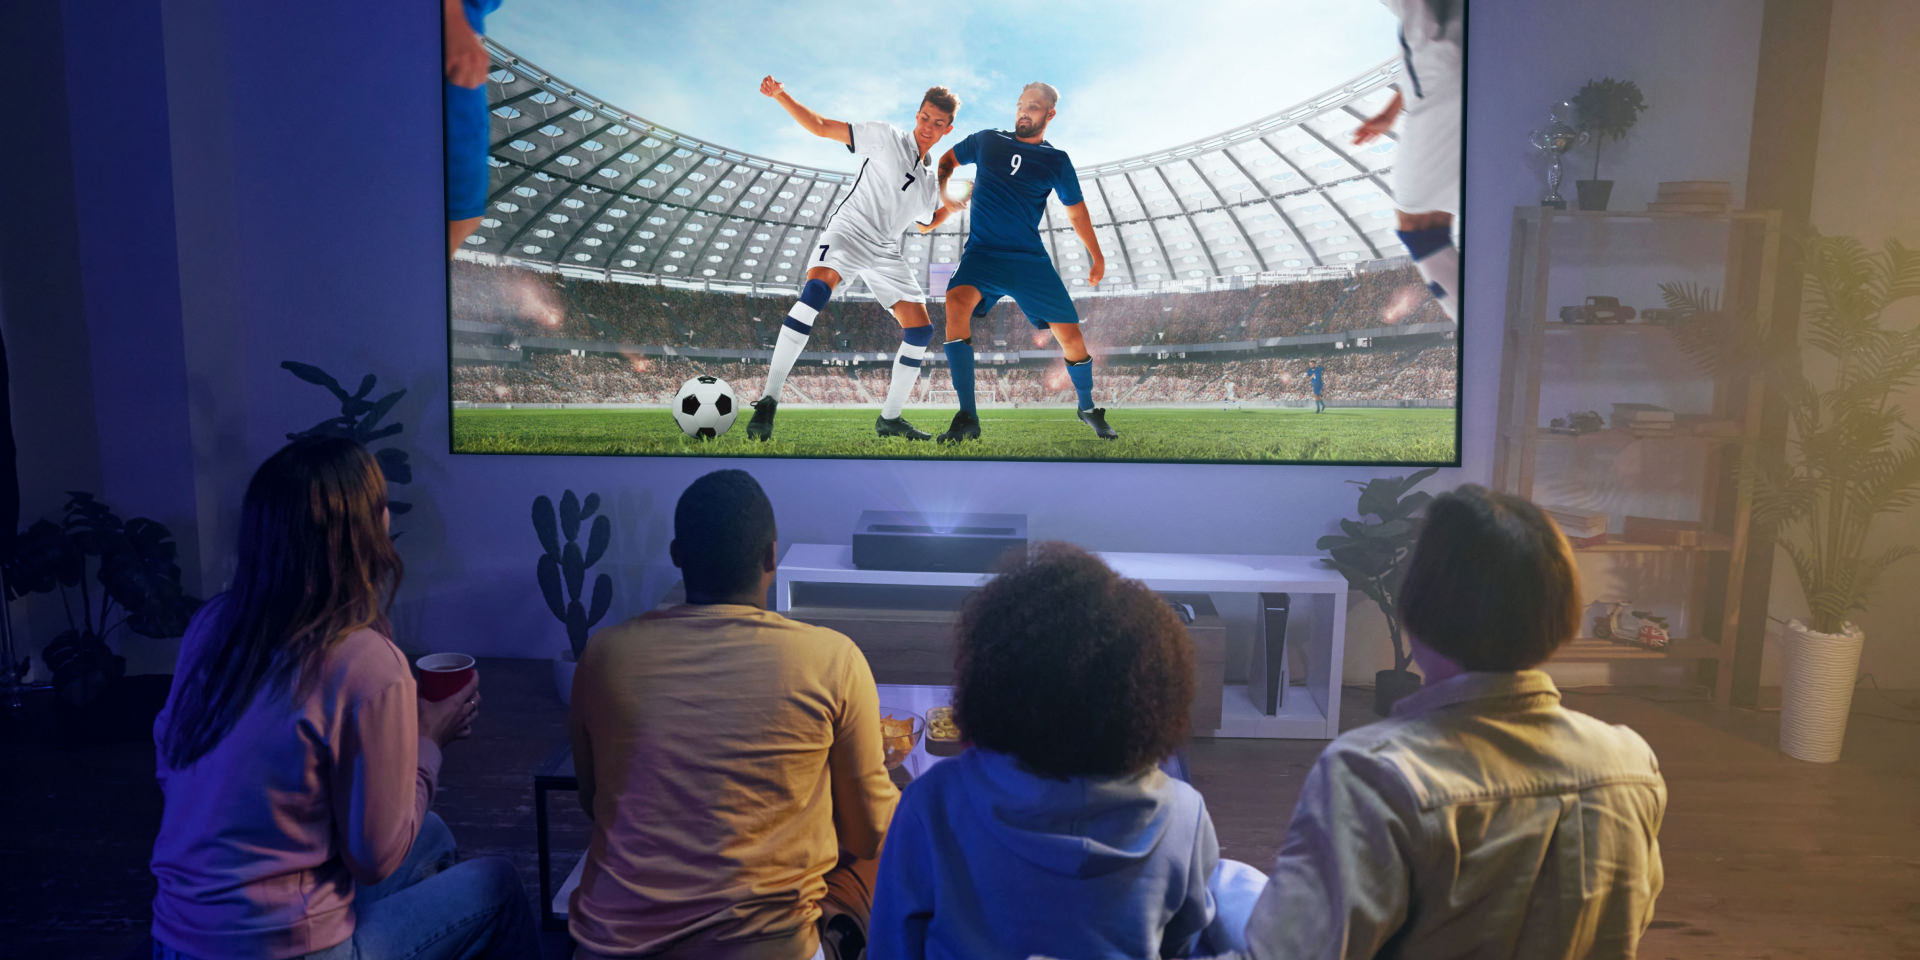 Stream FIFA World Cup sports on Formovie THEATER 4K Projector